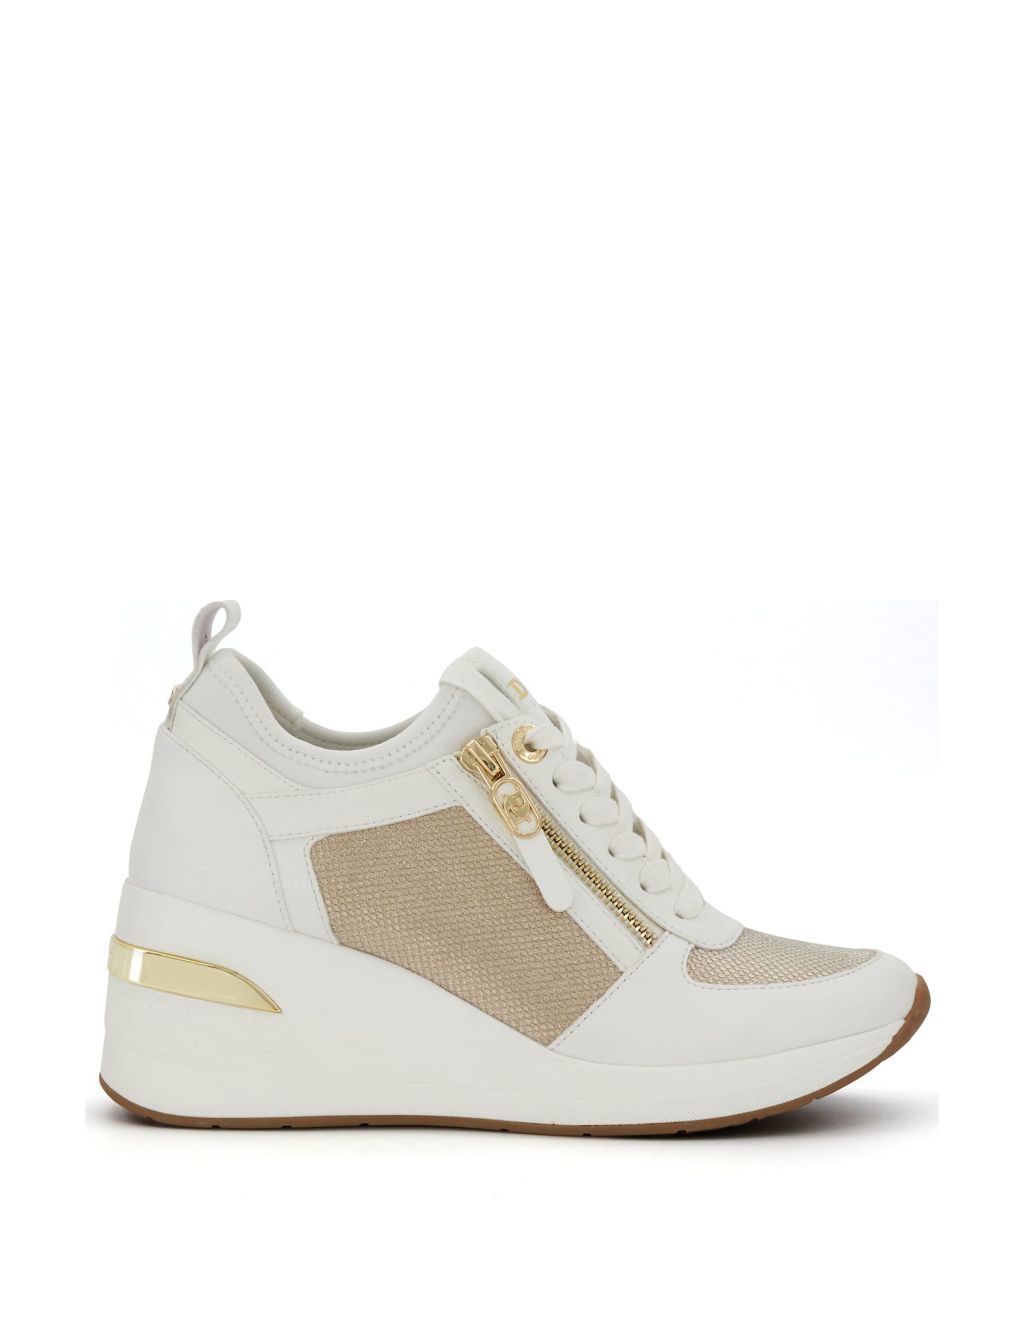 Leather Lace Up Side Detail Wedge Trainers image 1